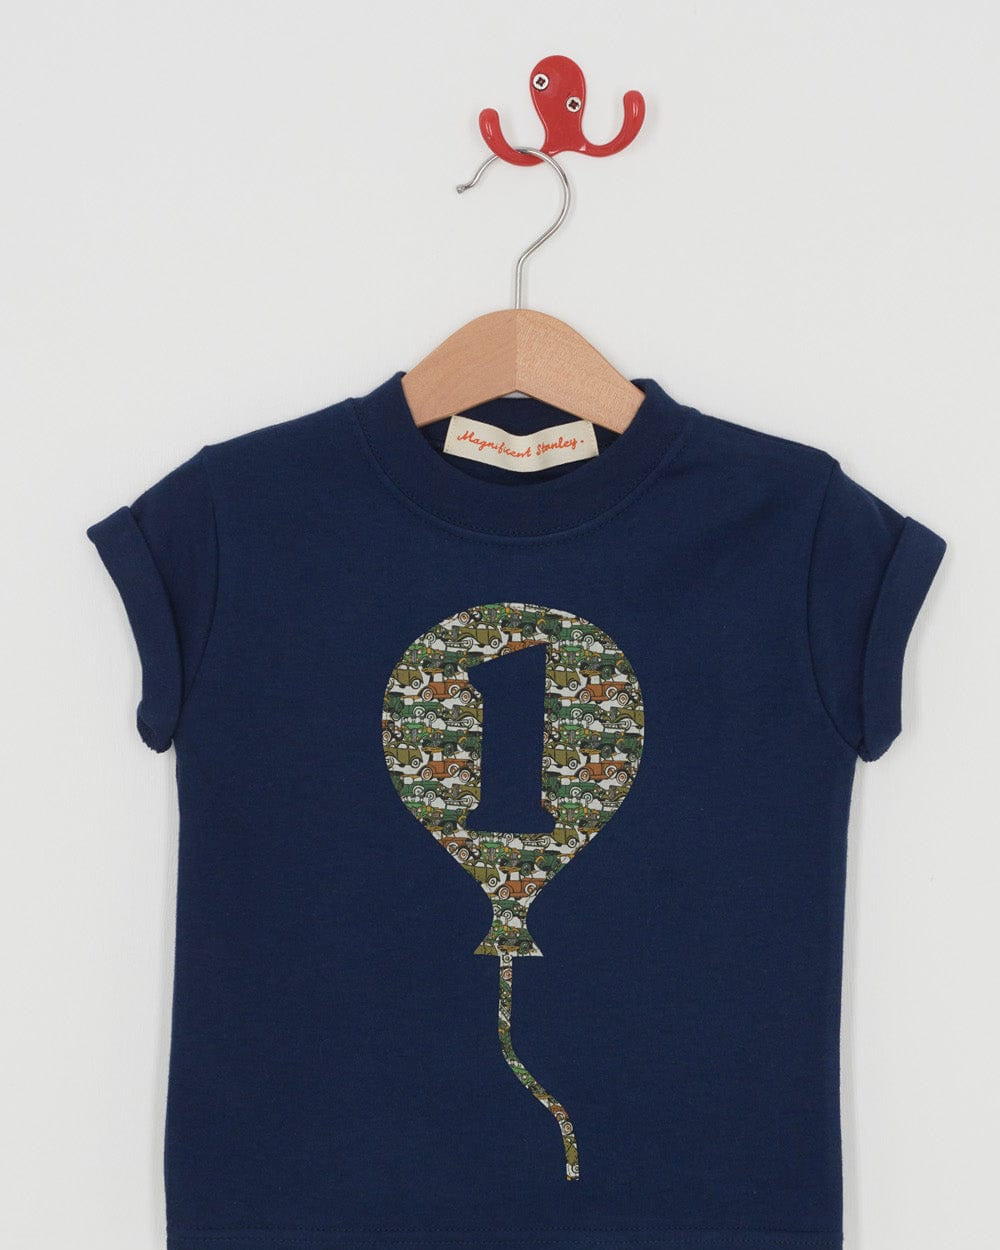 Magnificent Stanley Tee Number Balloon Navy T-Shirt in Choice of Liberty Print